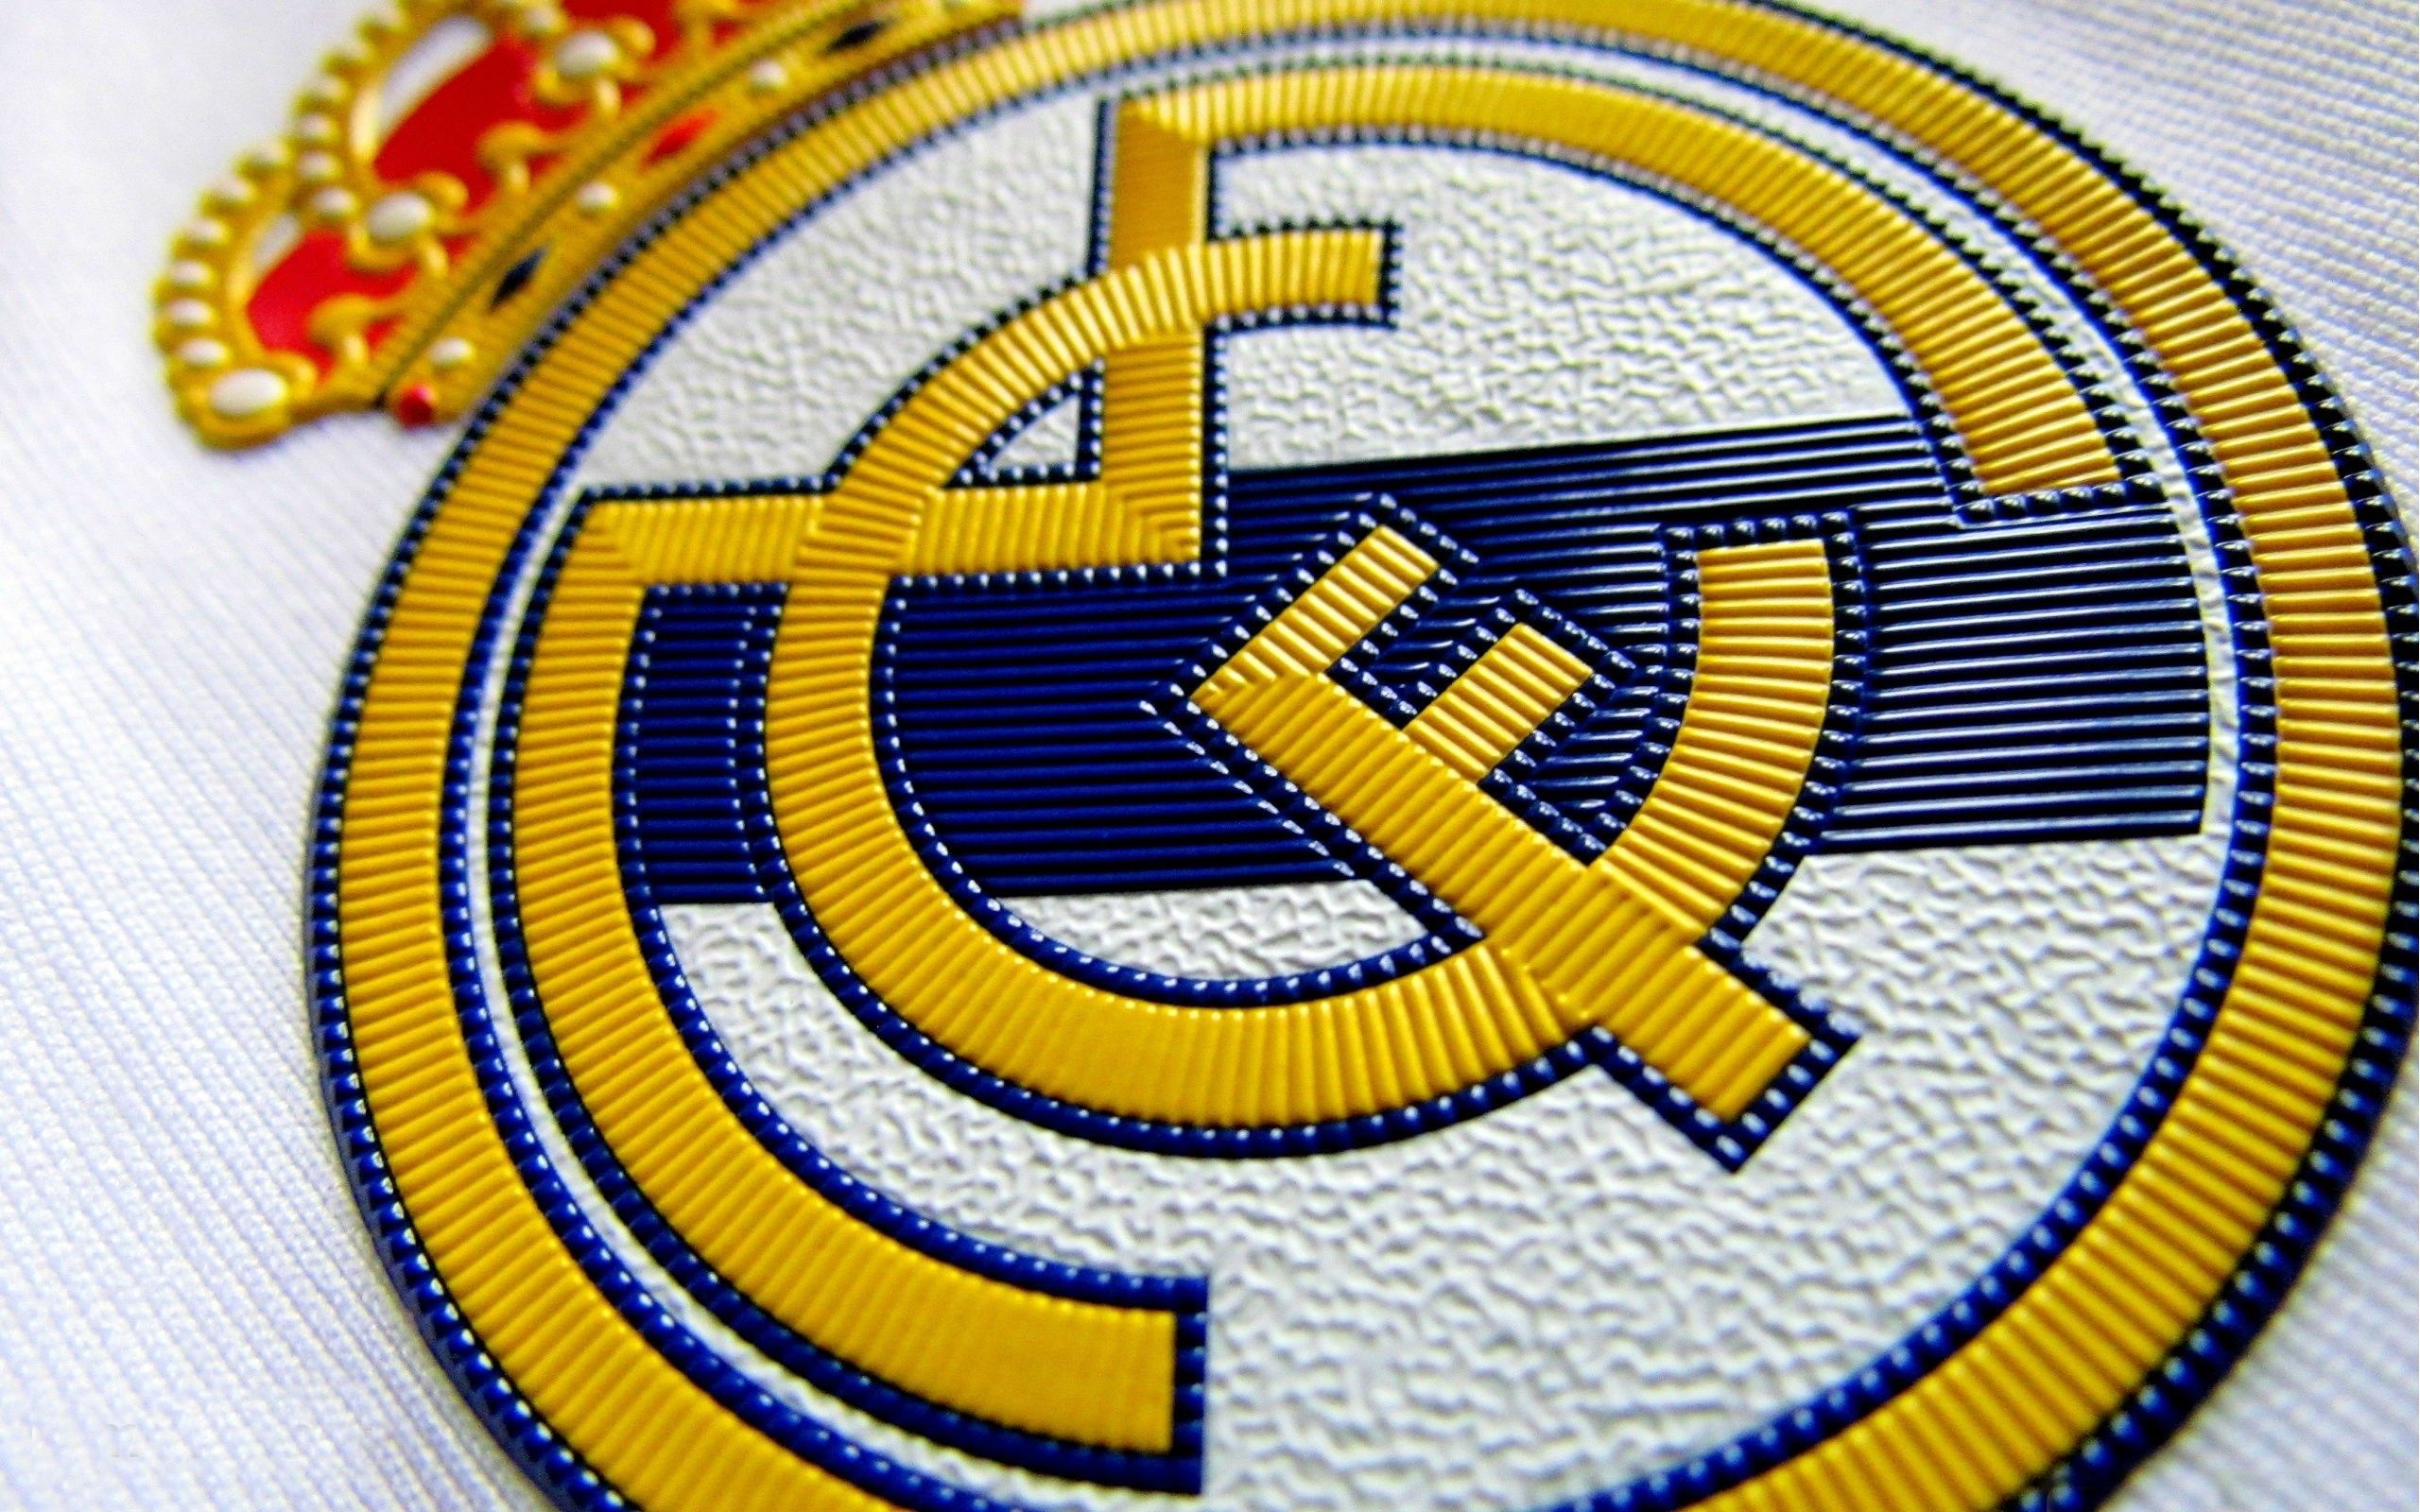 Real Madrid Logo 2016 Football Club Wallpapers, Backgrounds